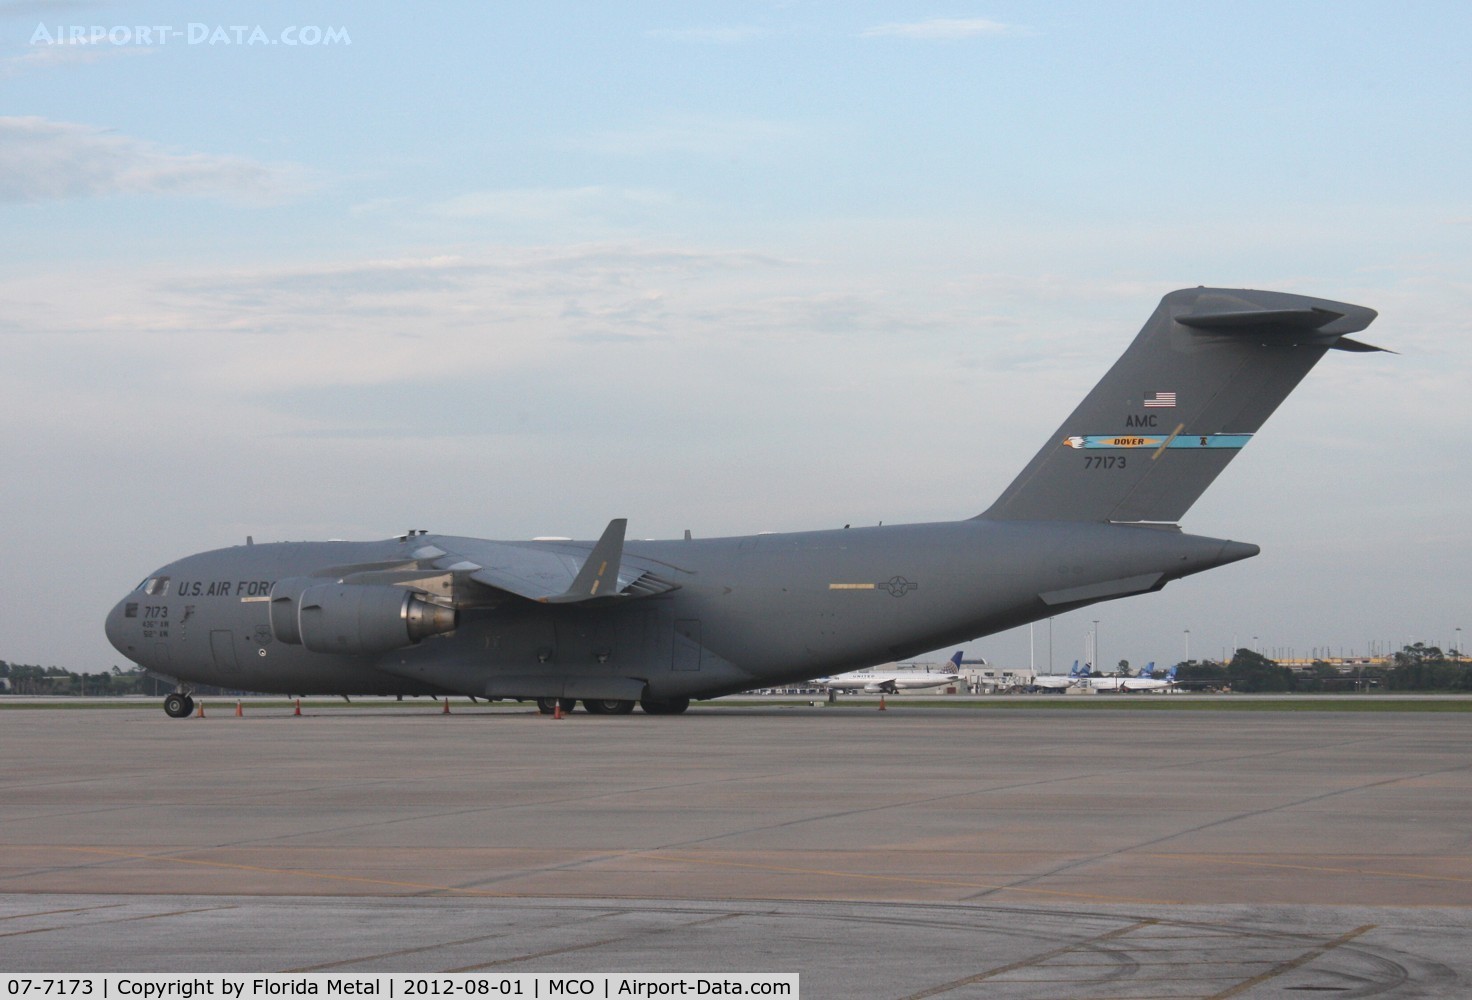 07-7173, 2007 Boeing C-17A Globemaster III C/N P-173, C-17 for an Obama visit